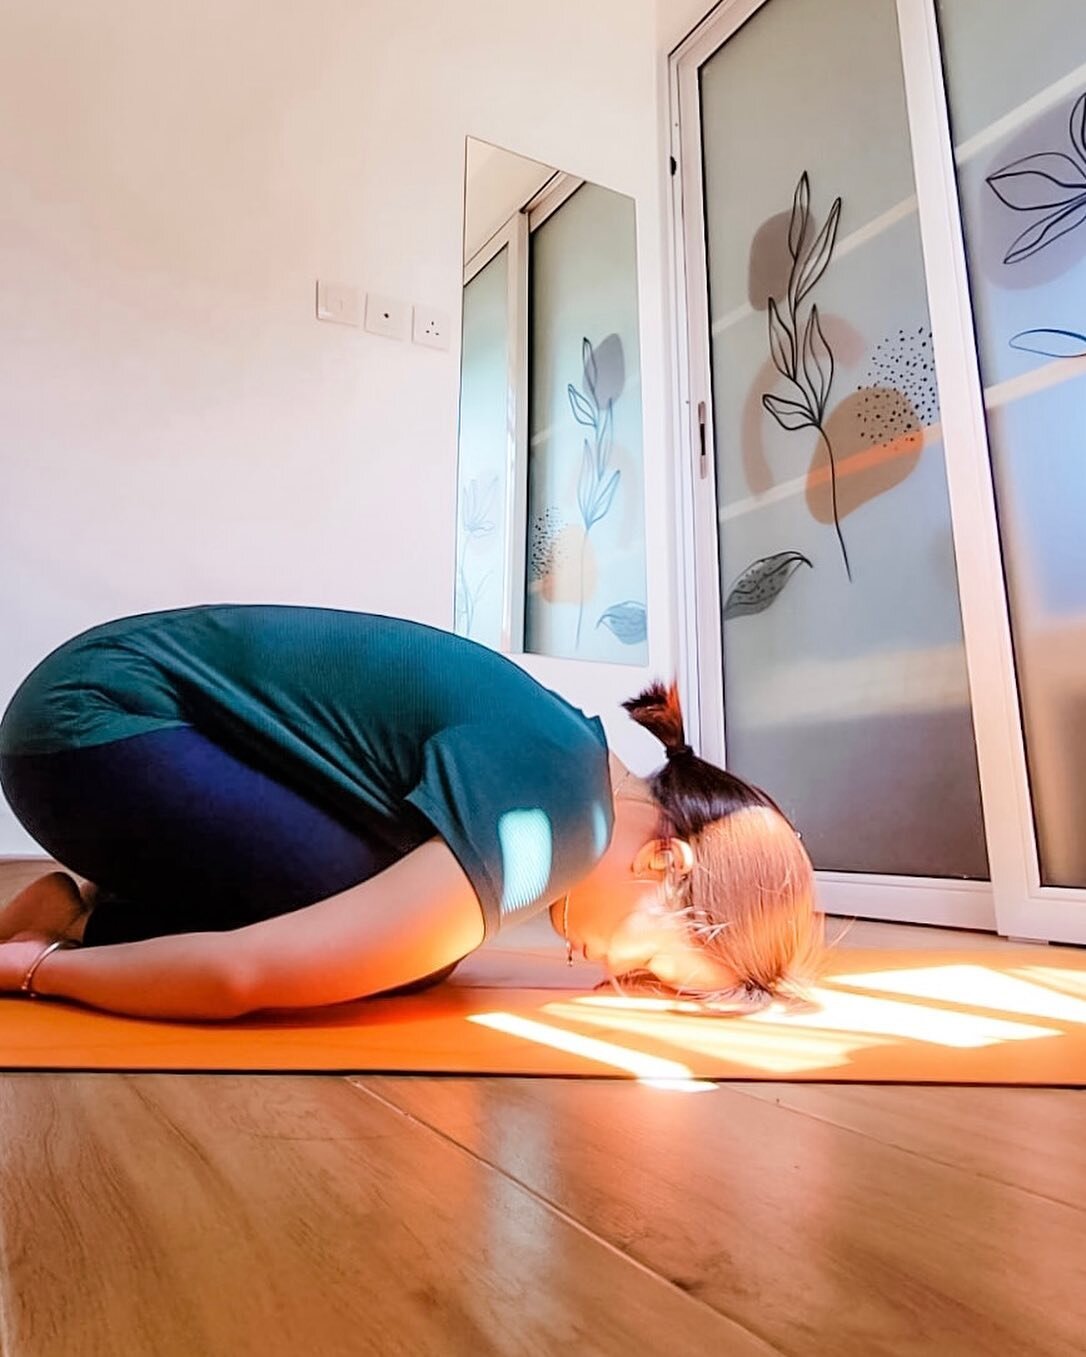 【4th Years Anniversary🧡The Journey to heal🧡Healing story by Alignment teacher Euka @theyoginah 】

Over the years of yoga practice and doing other activities, I have gain multiple injuries. The most recent ones are on my hip and my shoulder blades. 